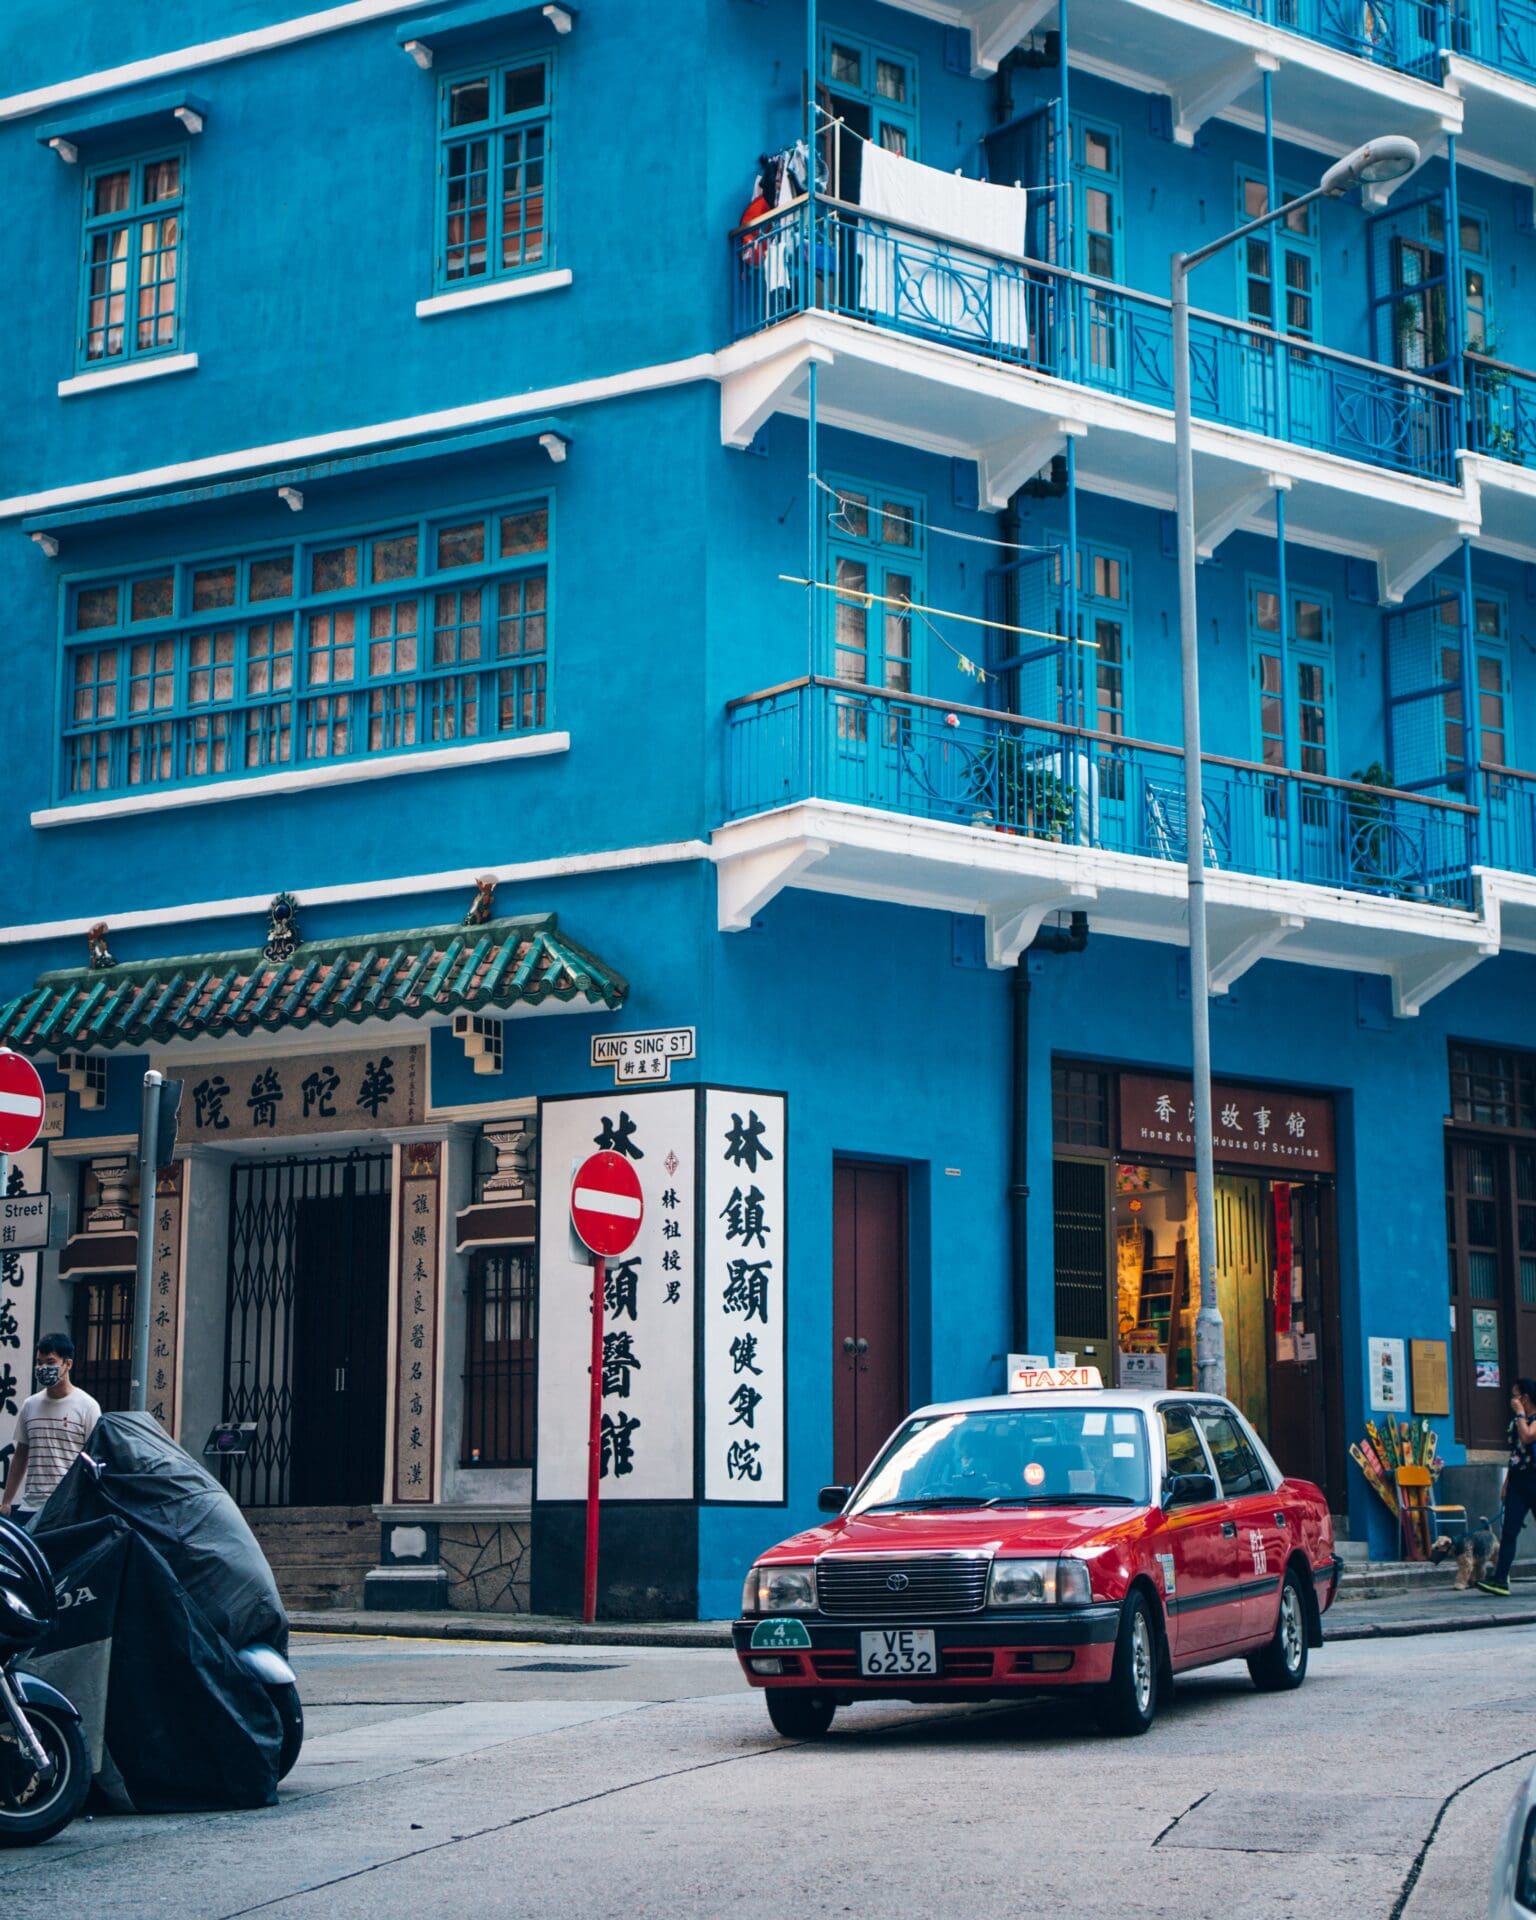 The Ying’nFlo hotel opens in Hong Kong | Blue traditional buildings in Wan Chai